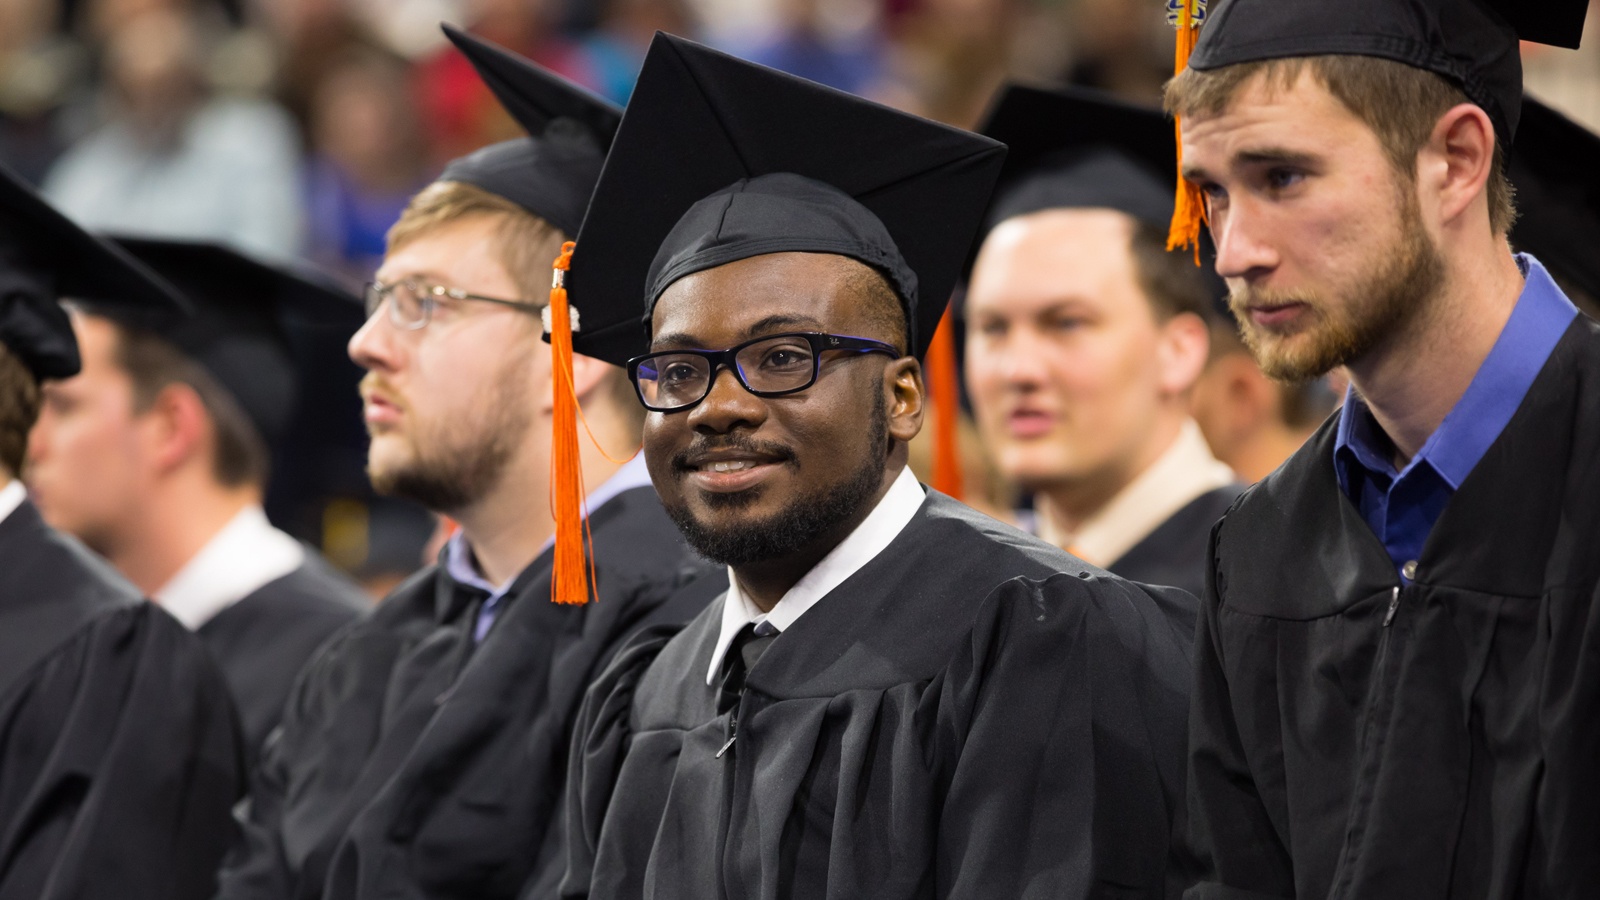 8 Undeniably Amazing Facts About the Power of a College Degree